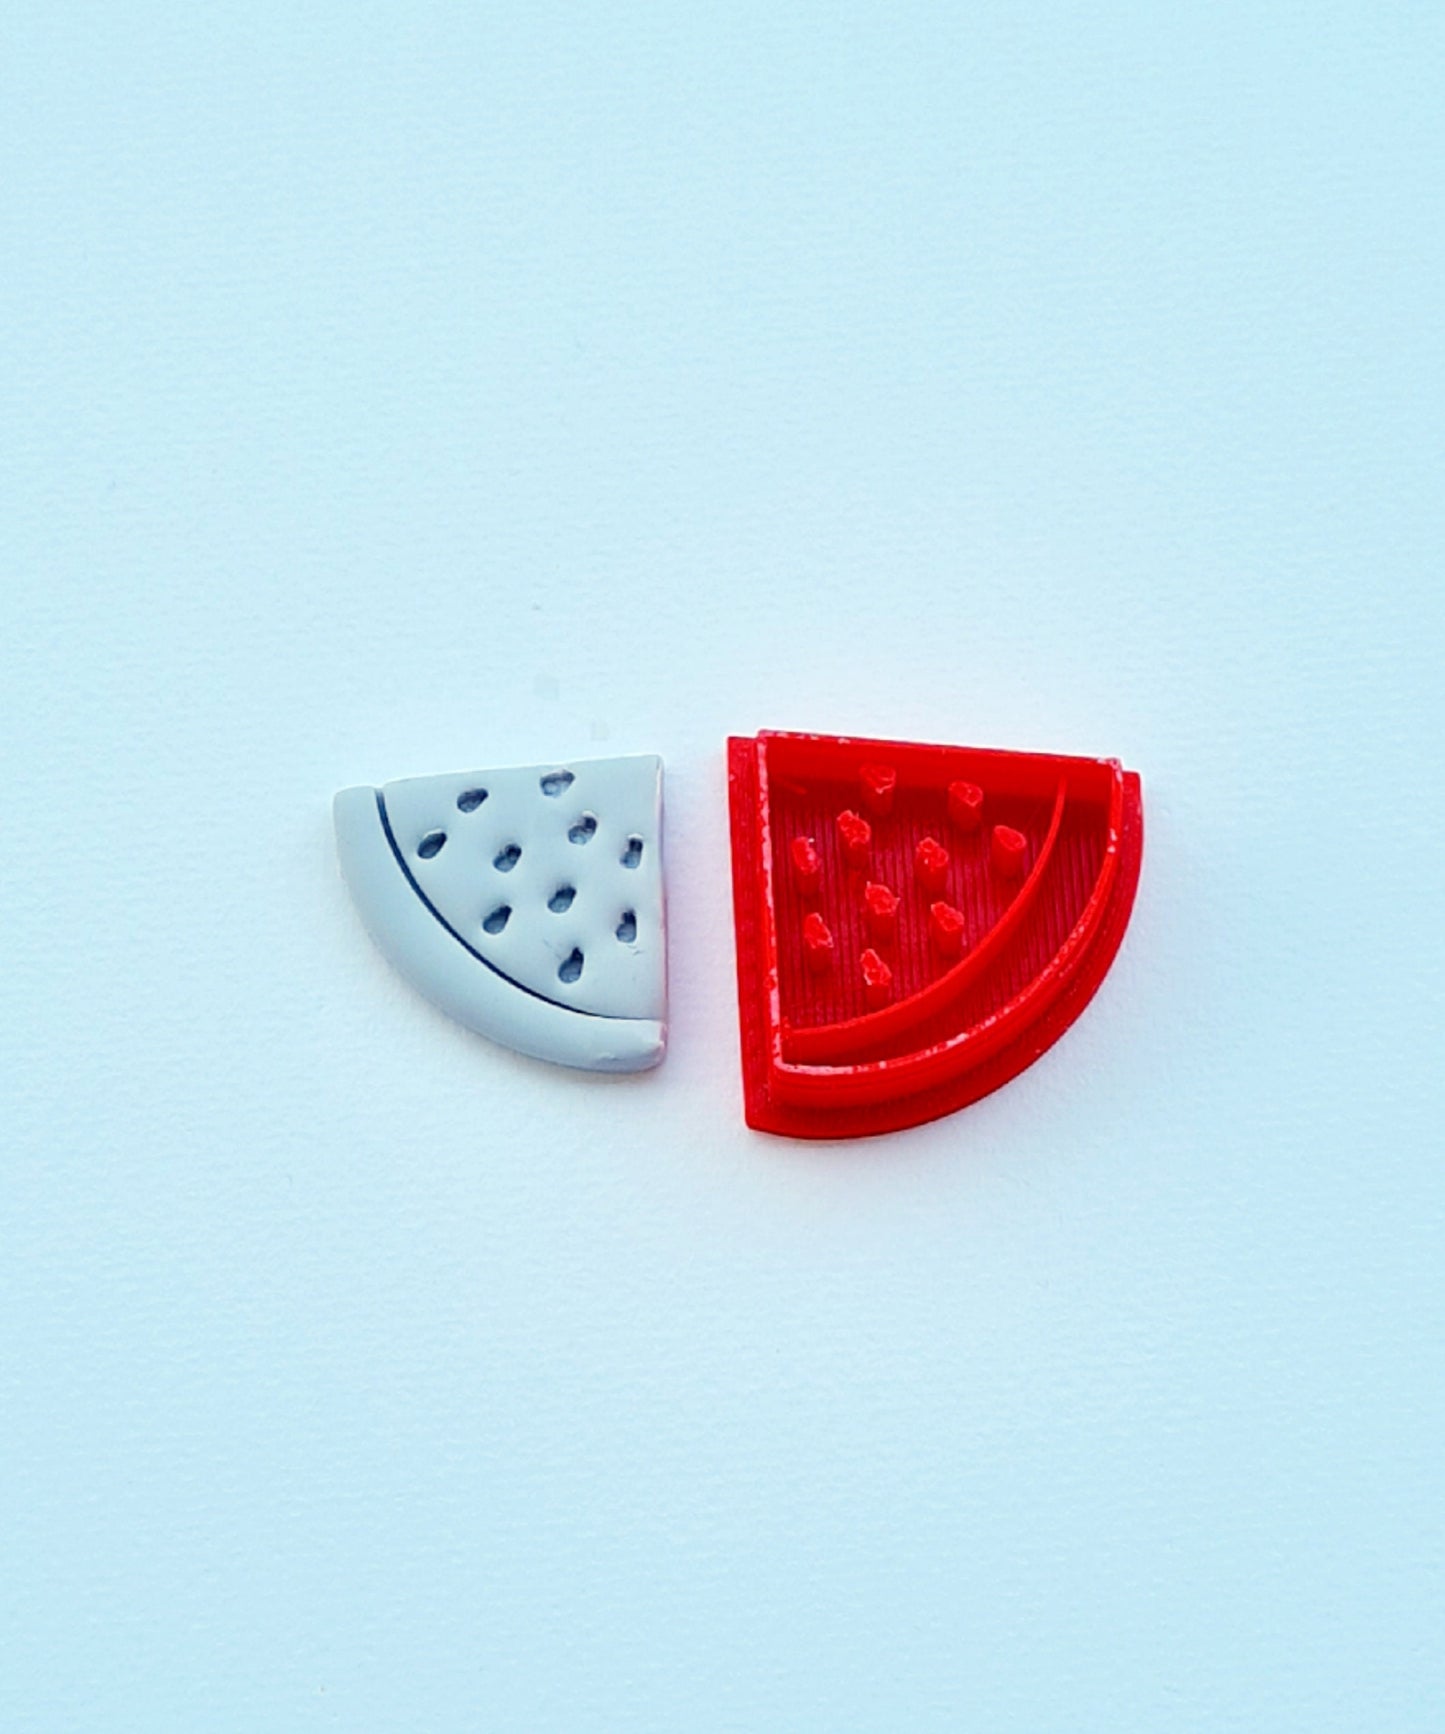 Watermelon Printed Clay, Polymer Clay, Cookie Cutter